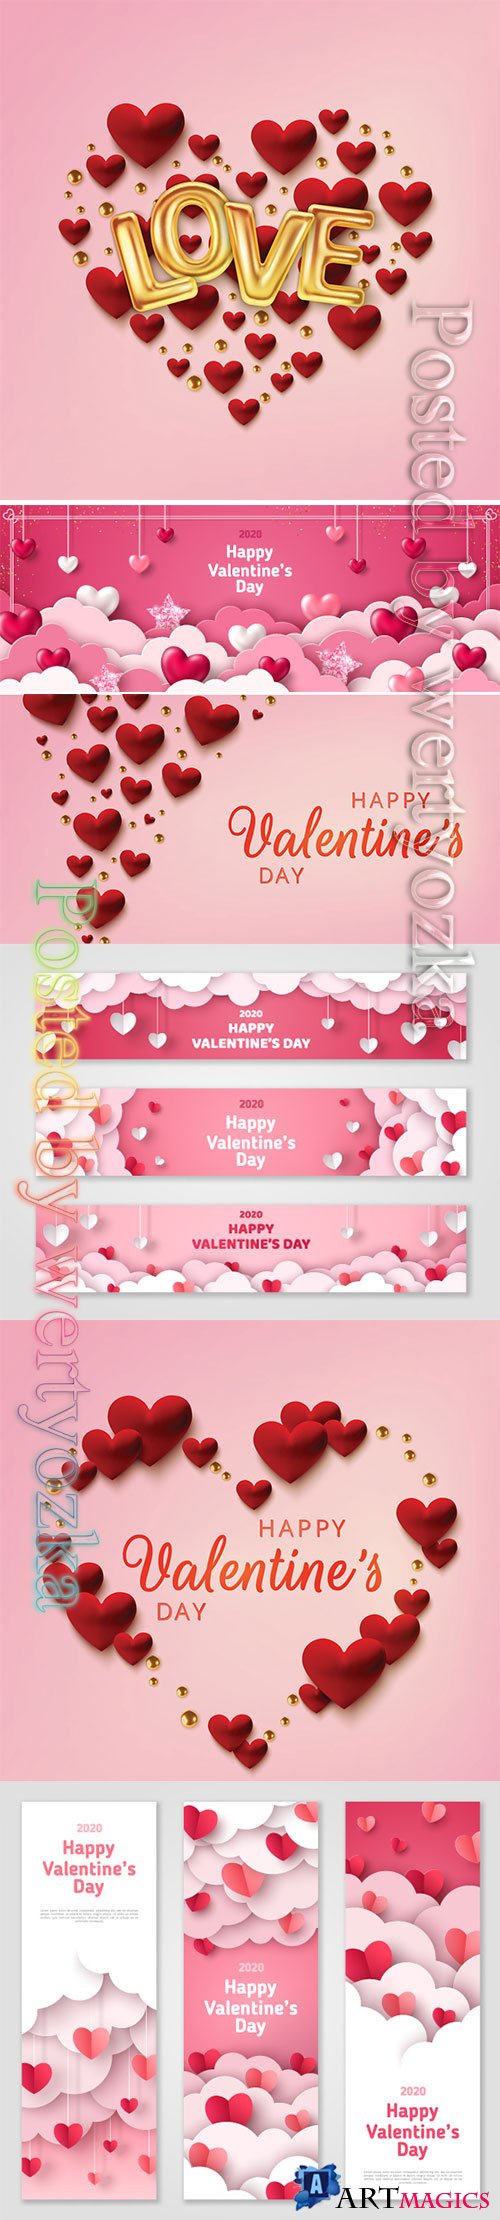 Valentines day vector background with heart # 7